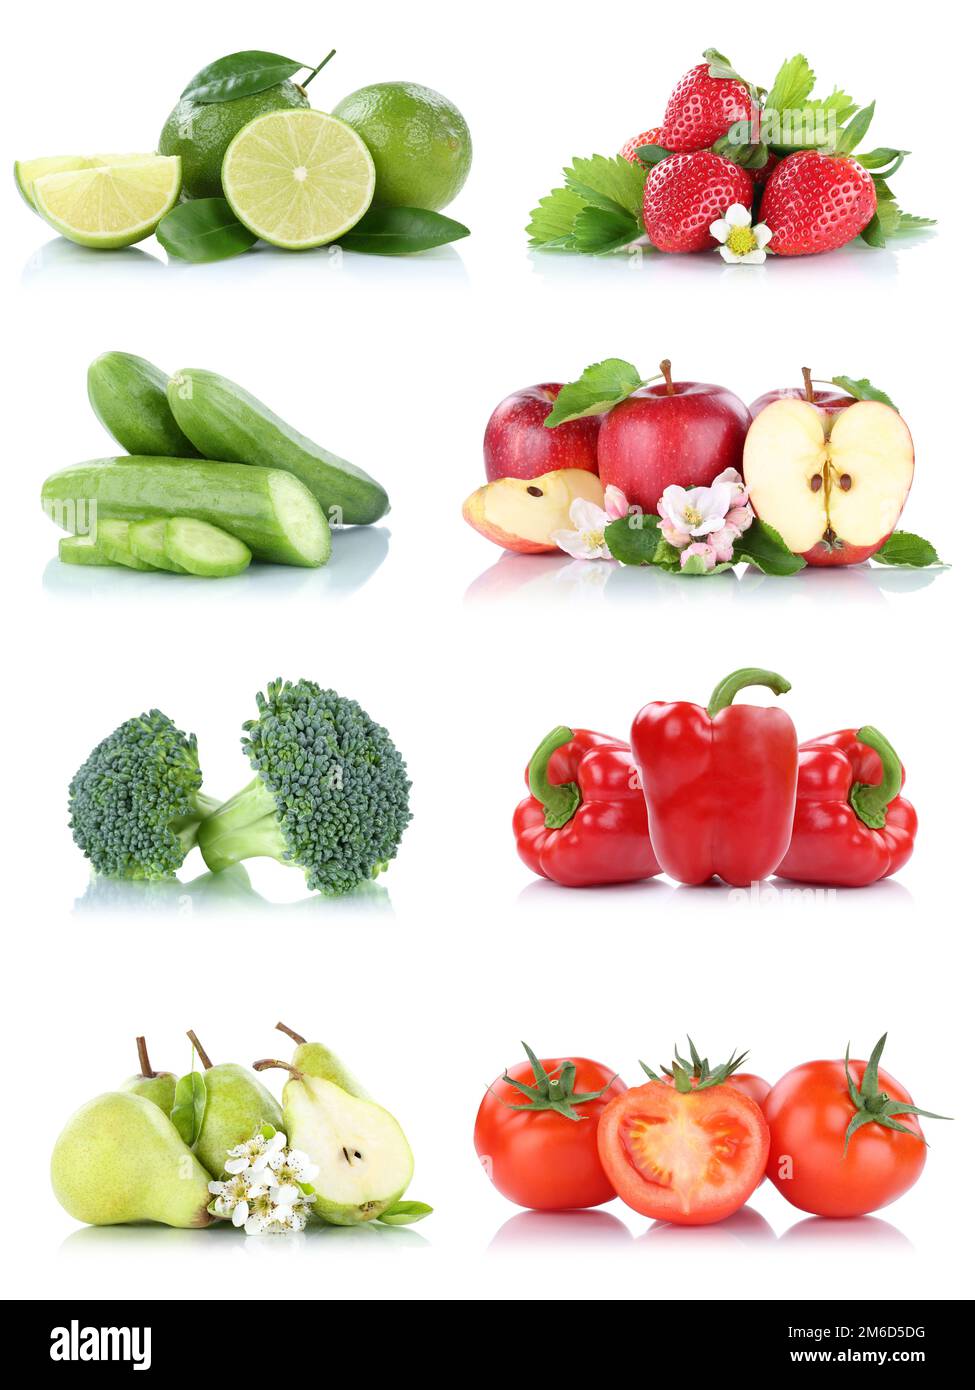 Fruits vegetables collection isolated apple apples tomatoes strawberries bell pepper colors fresh fruit Stock Photo